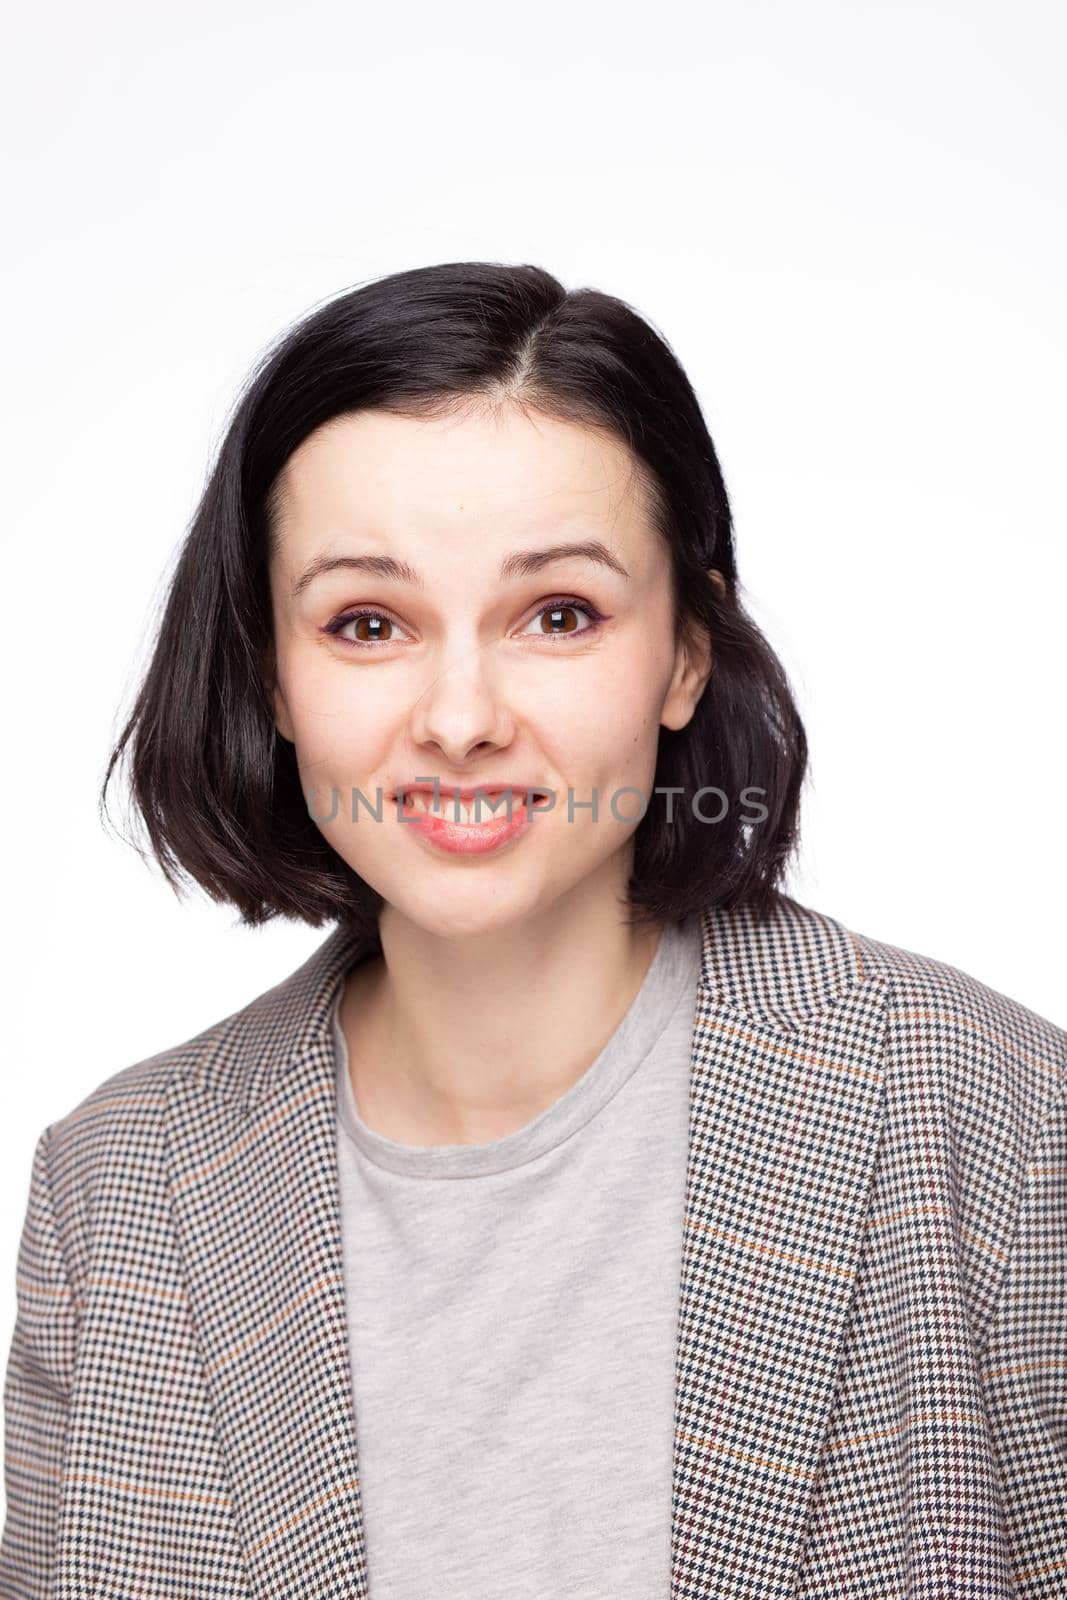 emotional woman in a gray t-shirt and jacket, white background. High quality photo